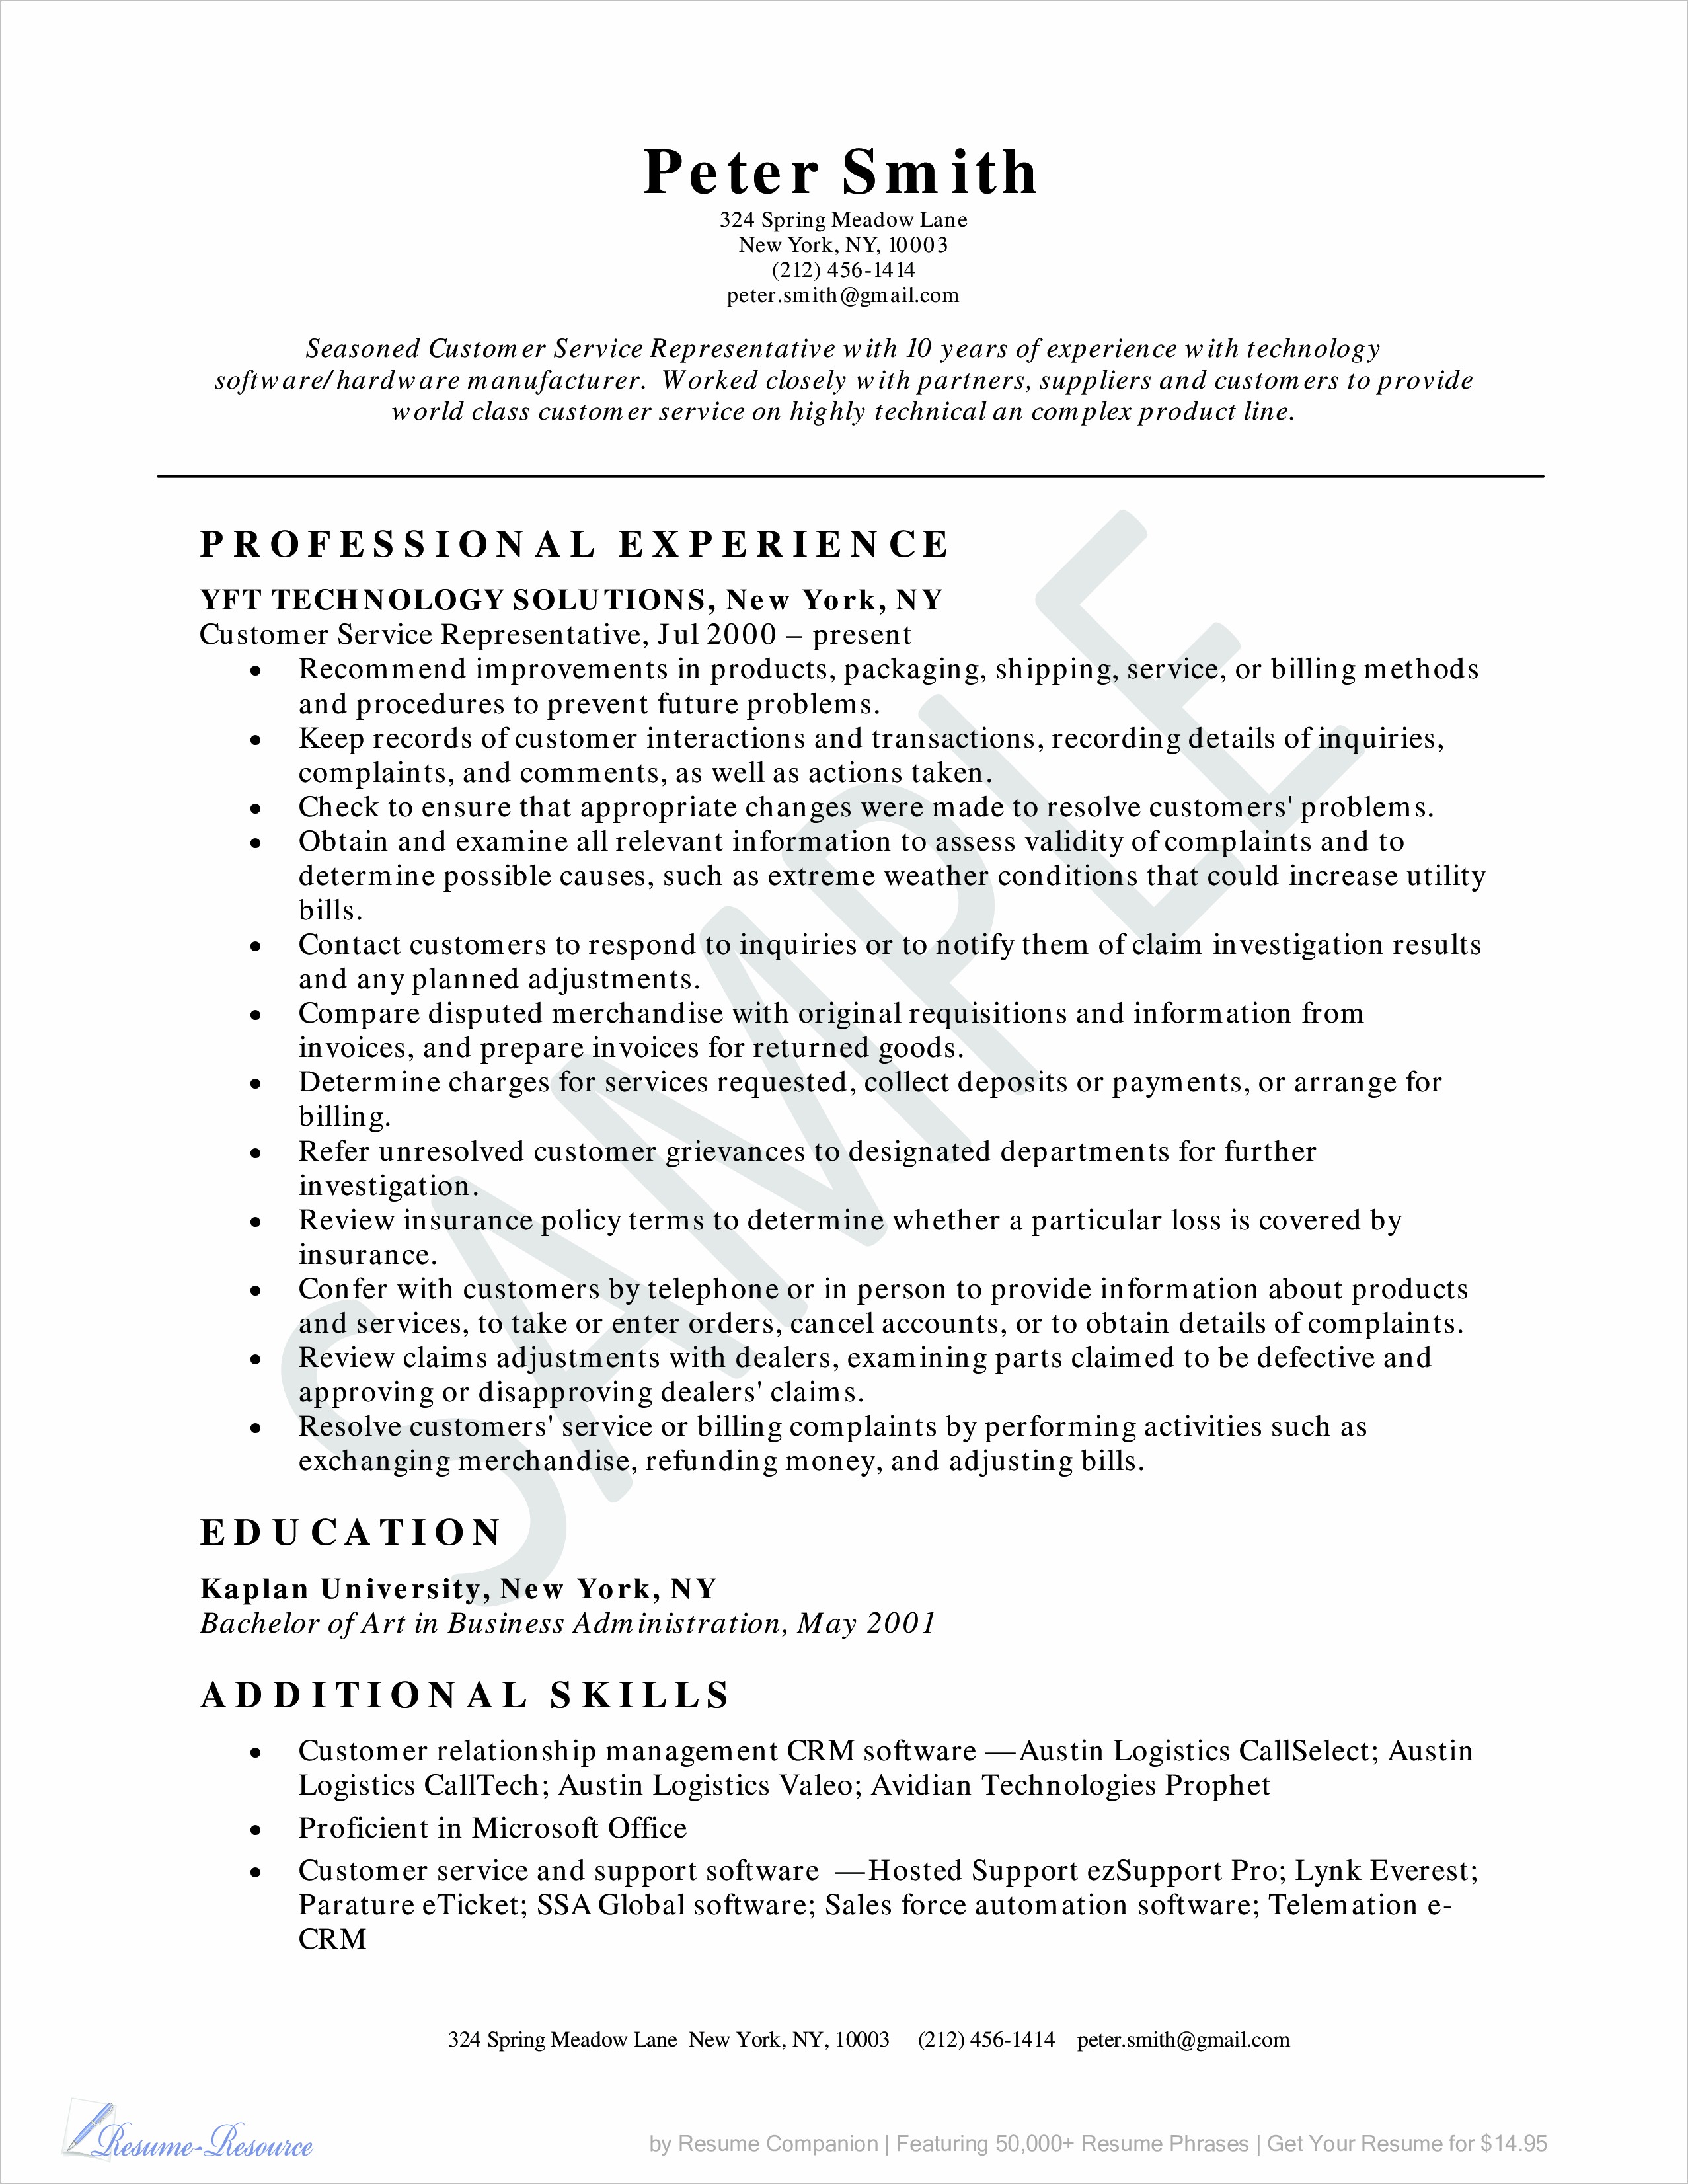 Additional Skills In Resume Example